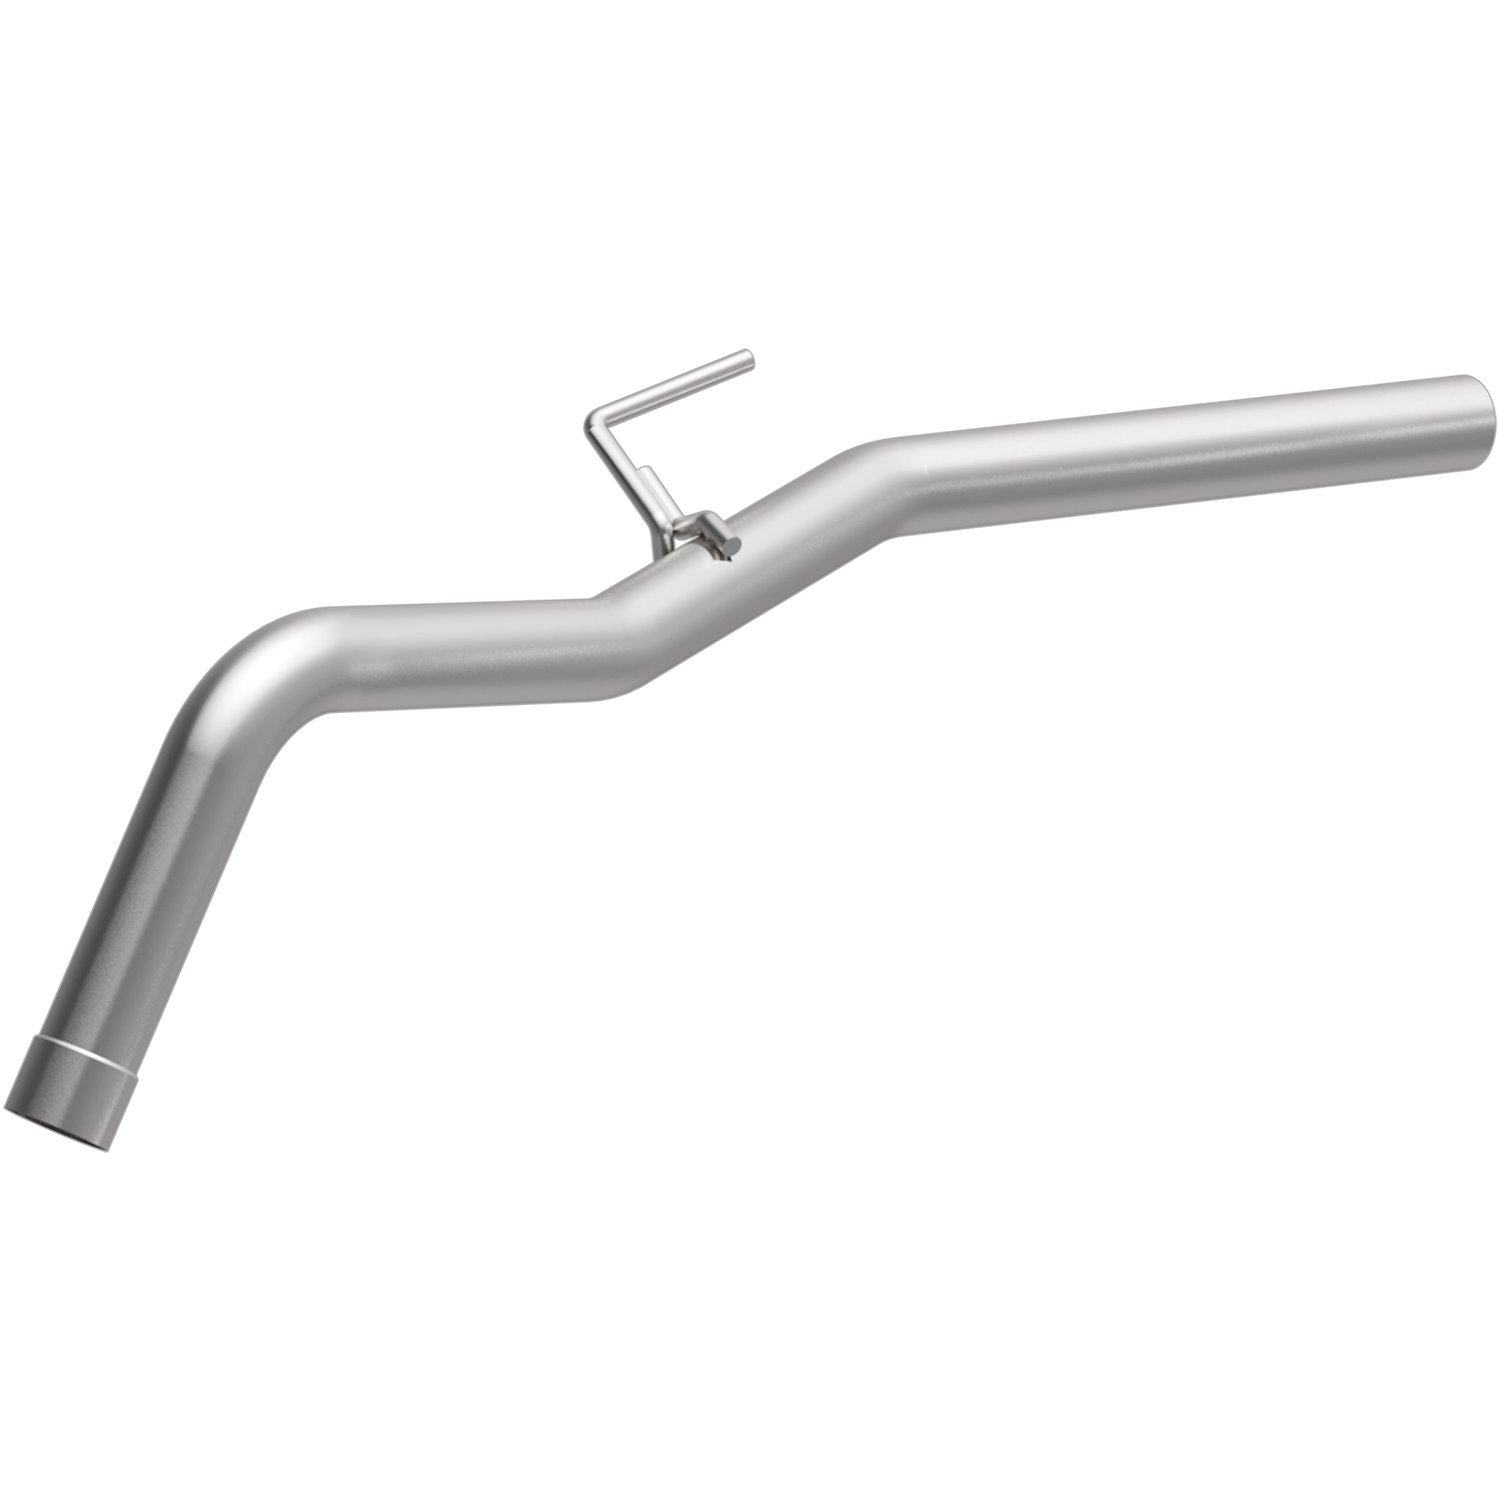 Direct-Fit Exhaust Tail Pipe, 2005-2015 Nissan Xterra 4.0L